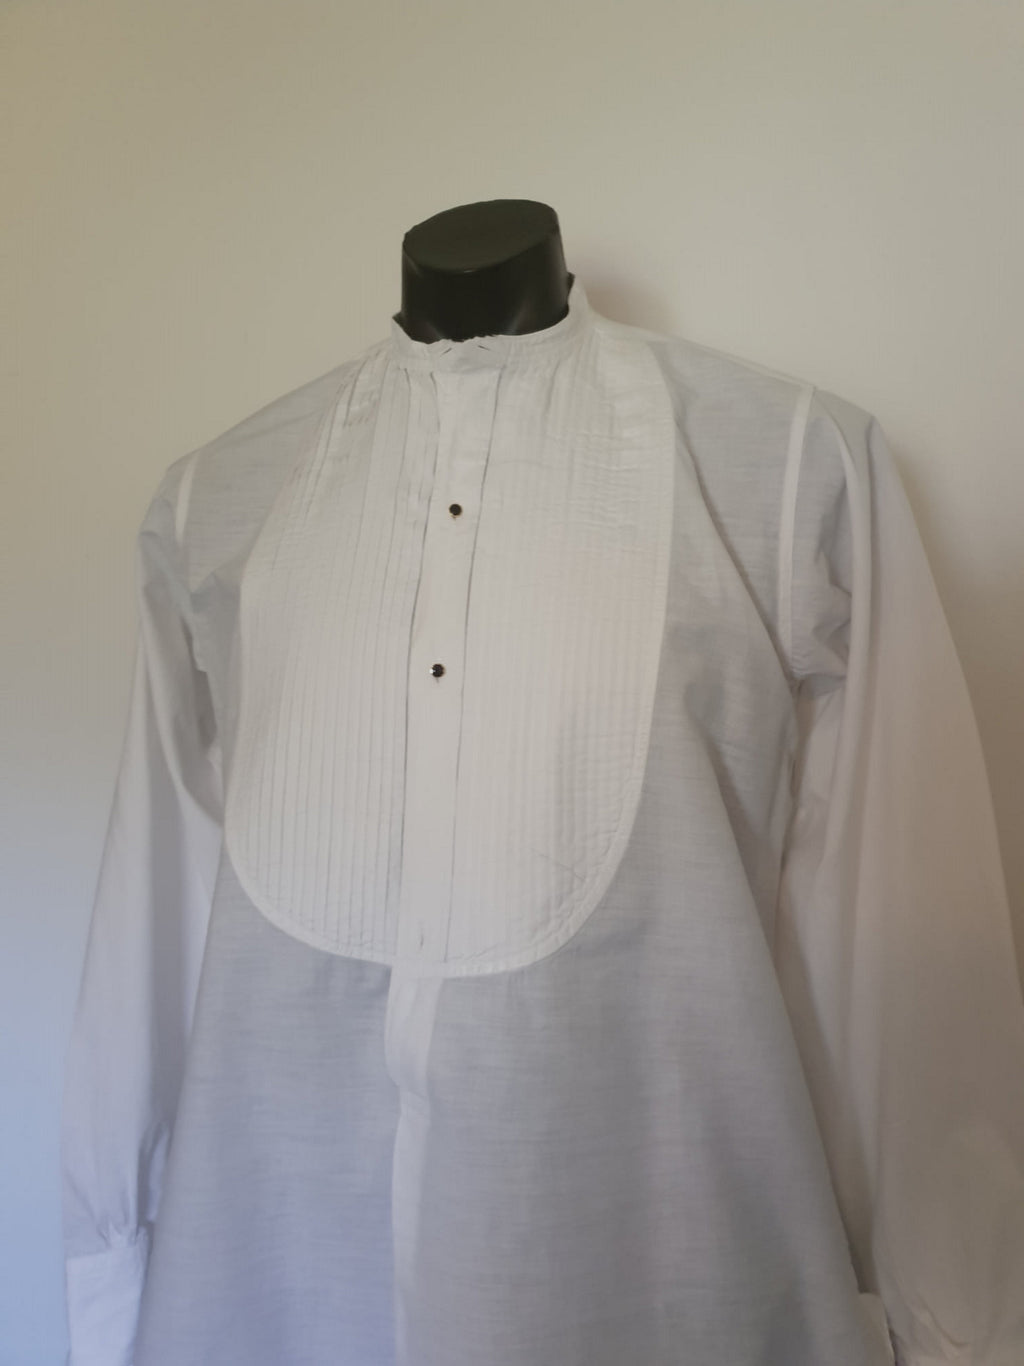 Antique edwardian negligee shirt or pullover dress shirt with band neck by pelaco